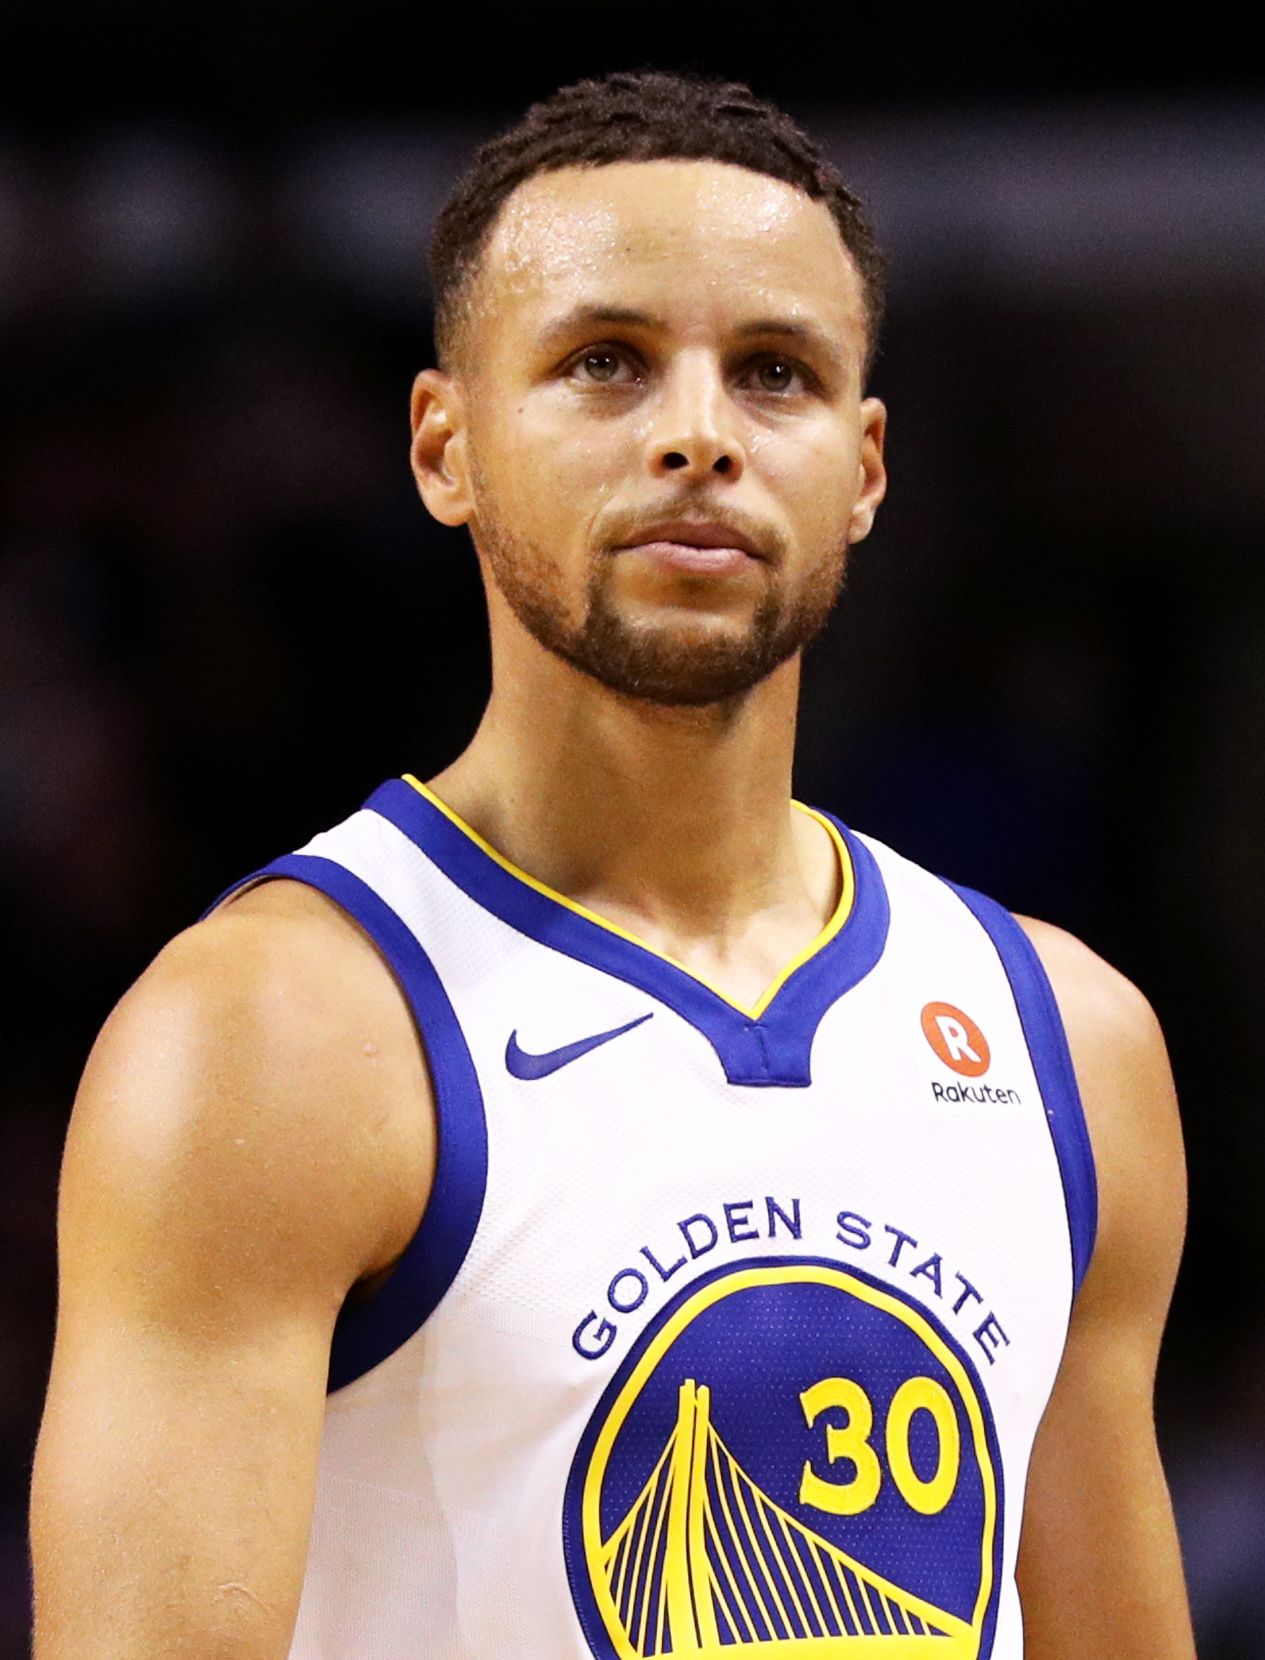 Stephen Curry of the Golden State Warriors during the second quarter against the Boston Celtics at TD Garden on November 16, 2017 in Boston, Massachusetts. | Photo: Getty Images